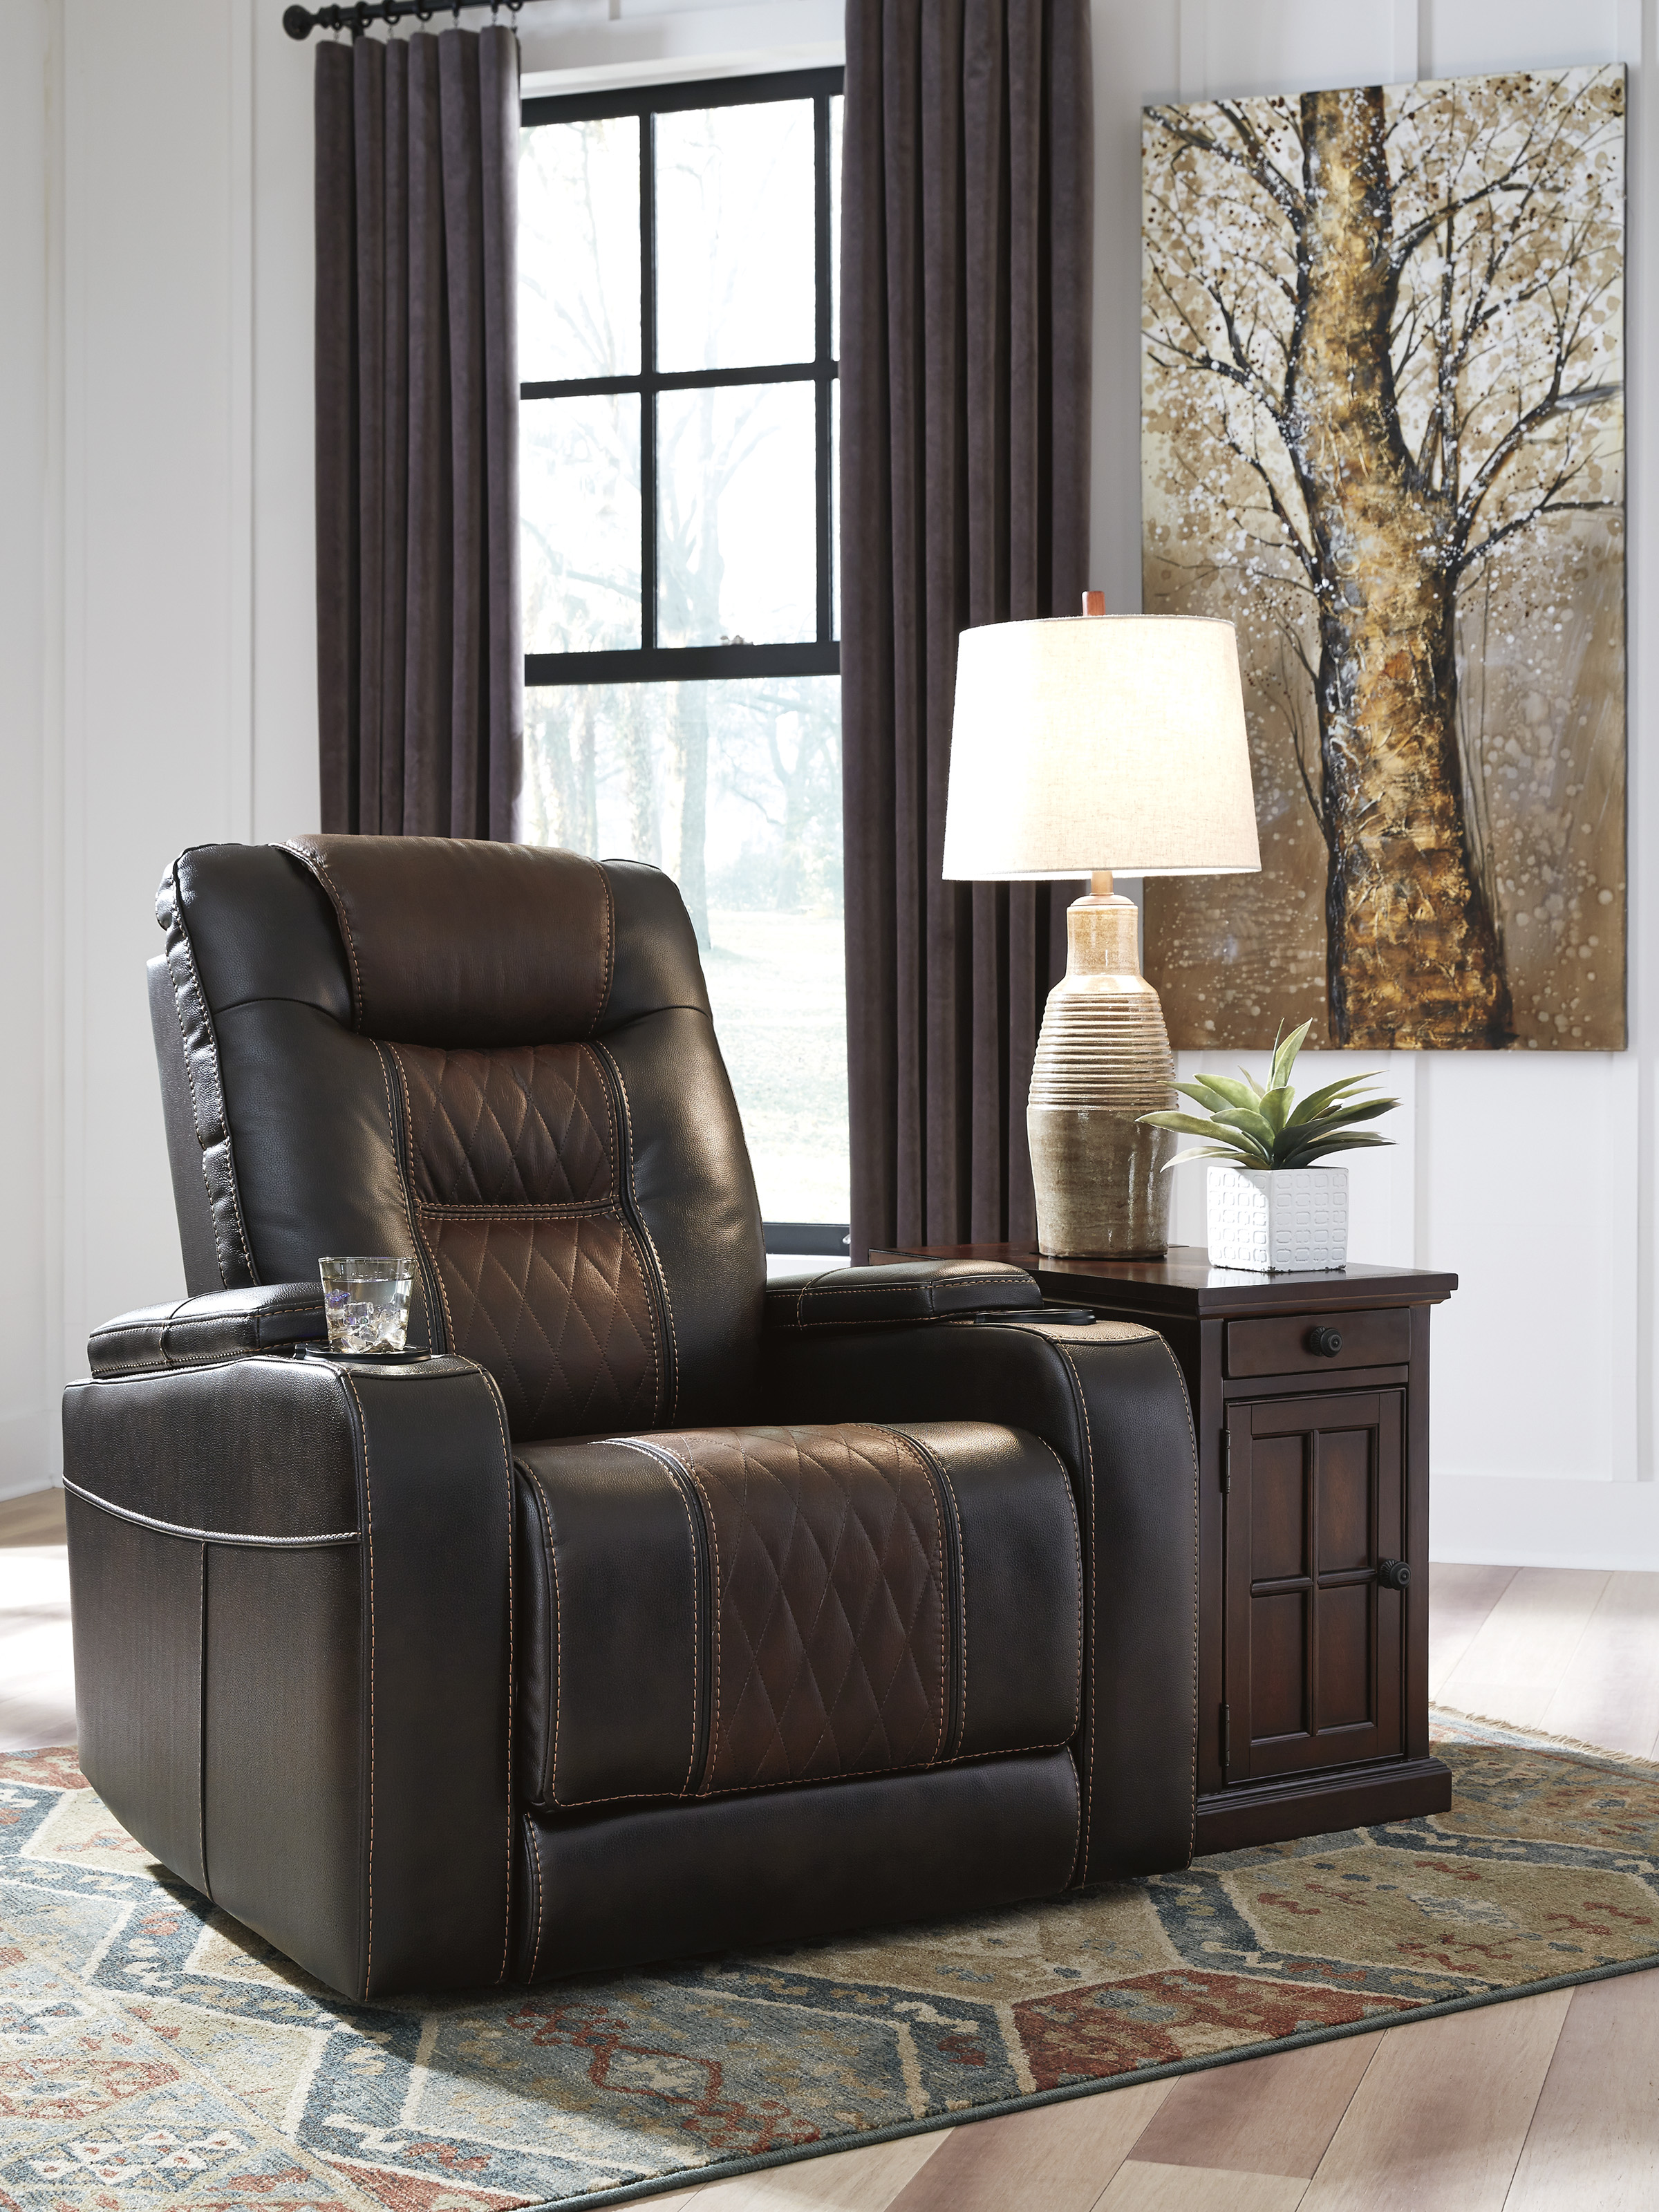 Recline and lounge for a relaxed dad